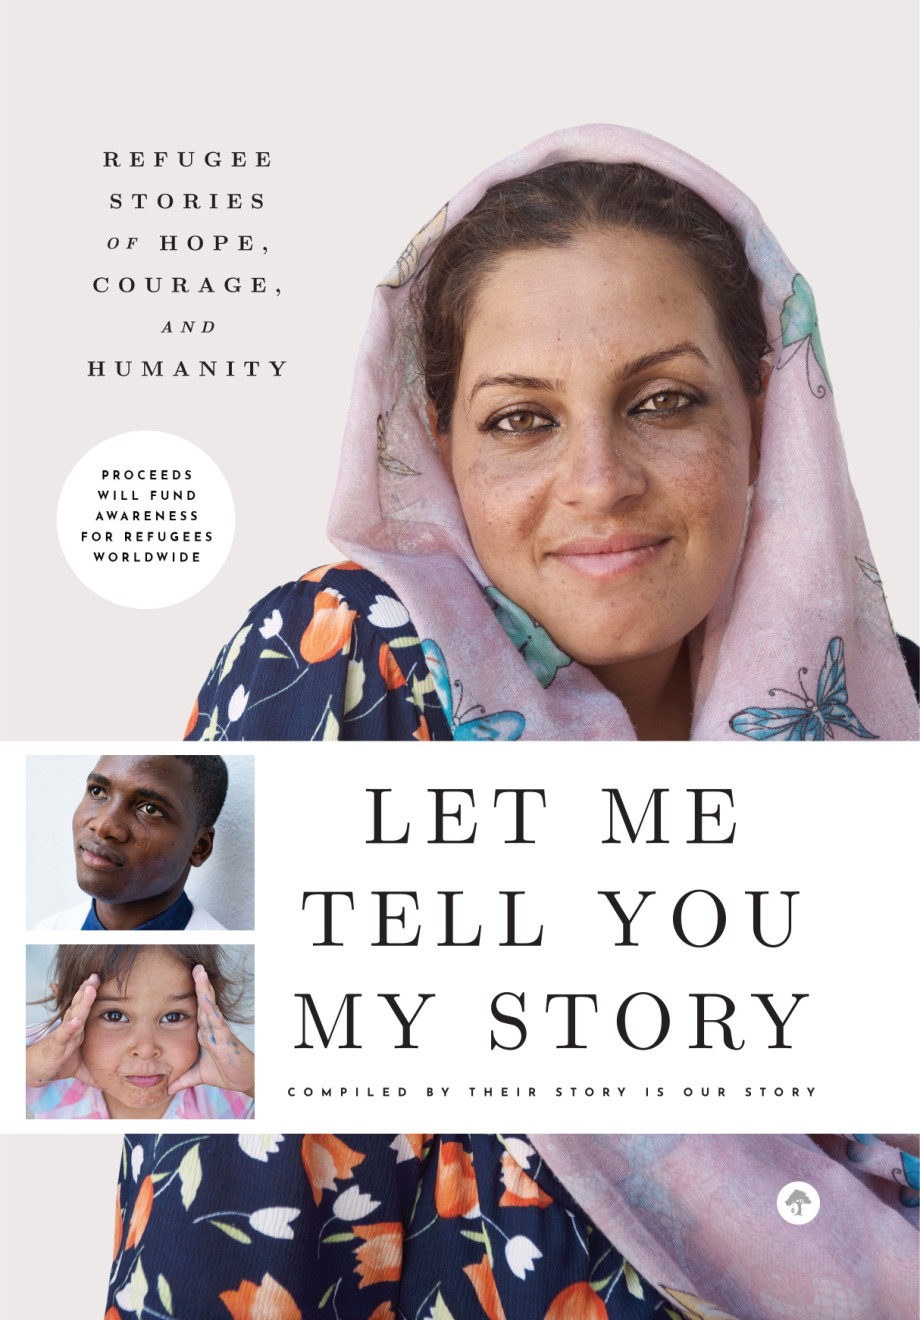 Let Me Tell You My Story Refugee Stories of Hope, Courage, and Humanity